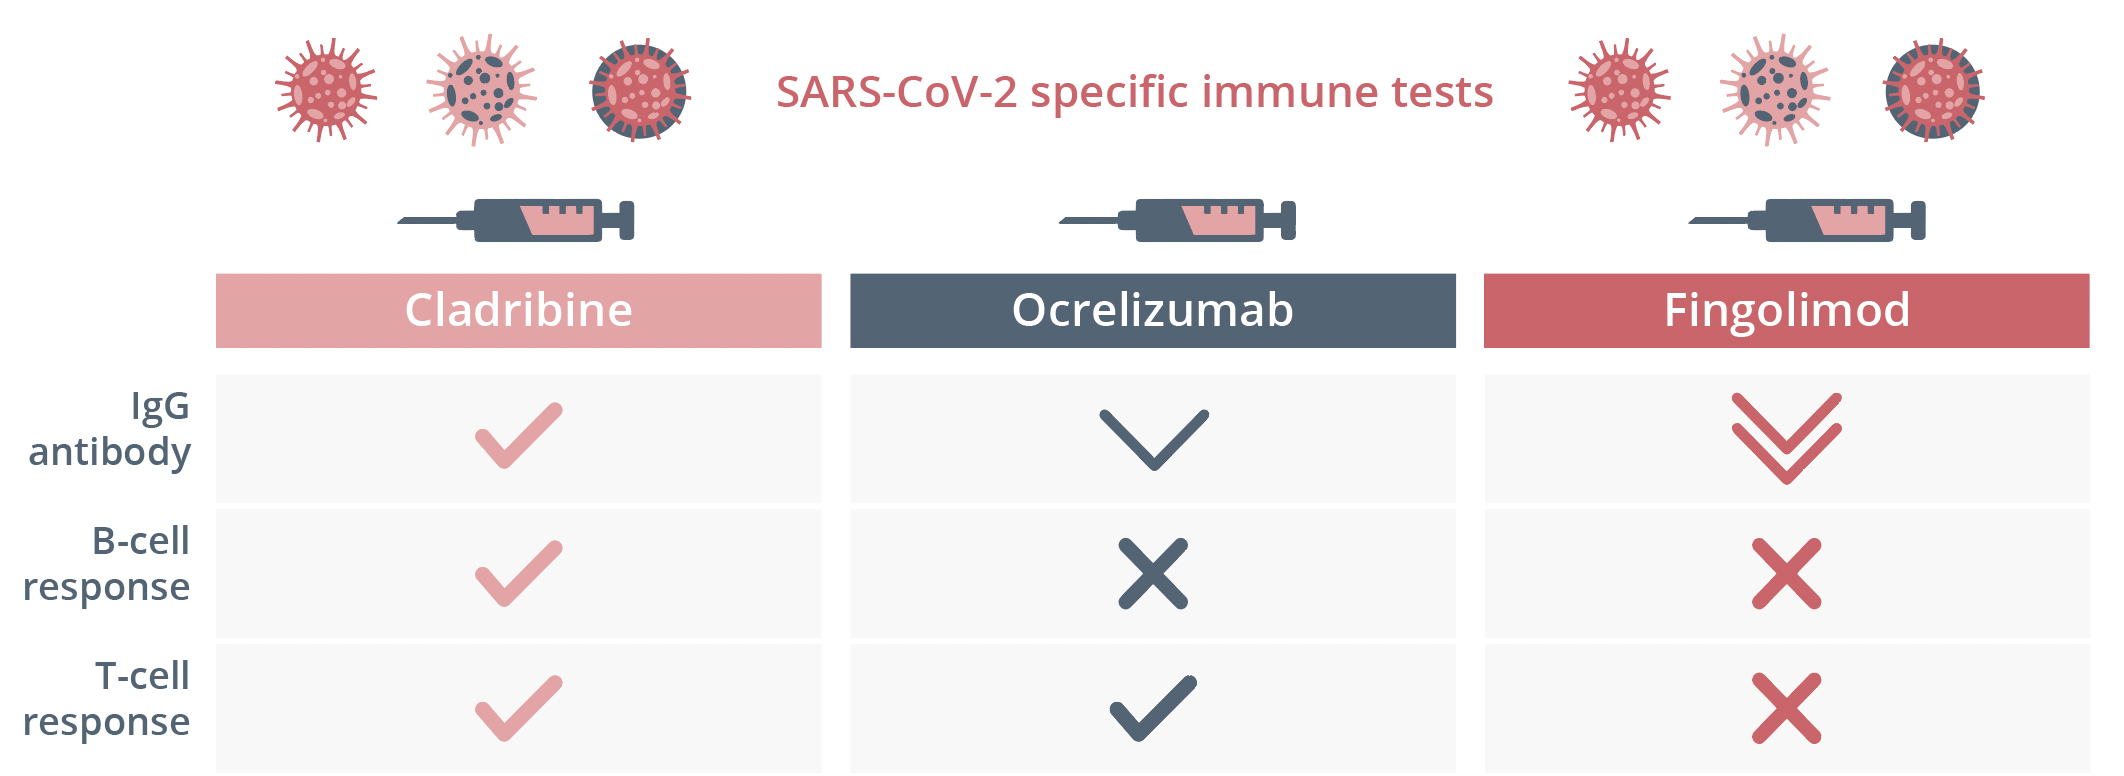 COVID-19 vaccination schedules may need to be amended based on DMT therapy